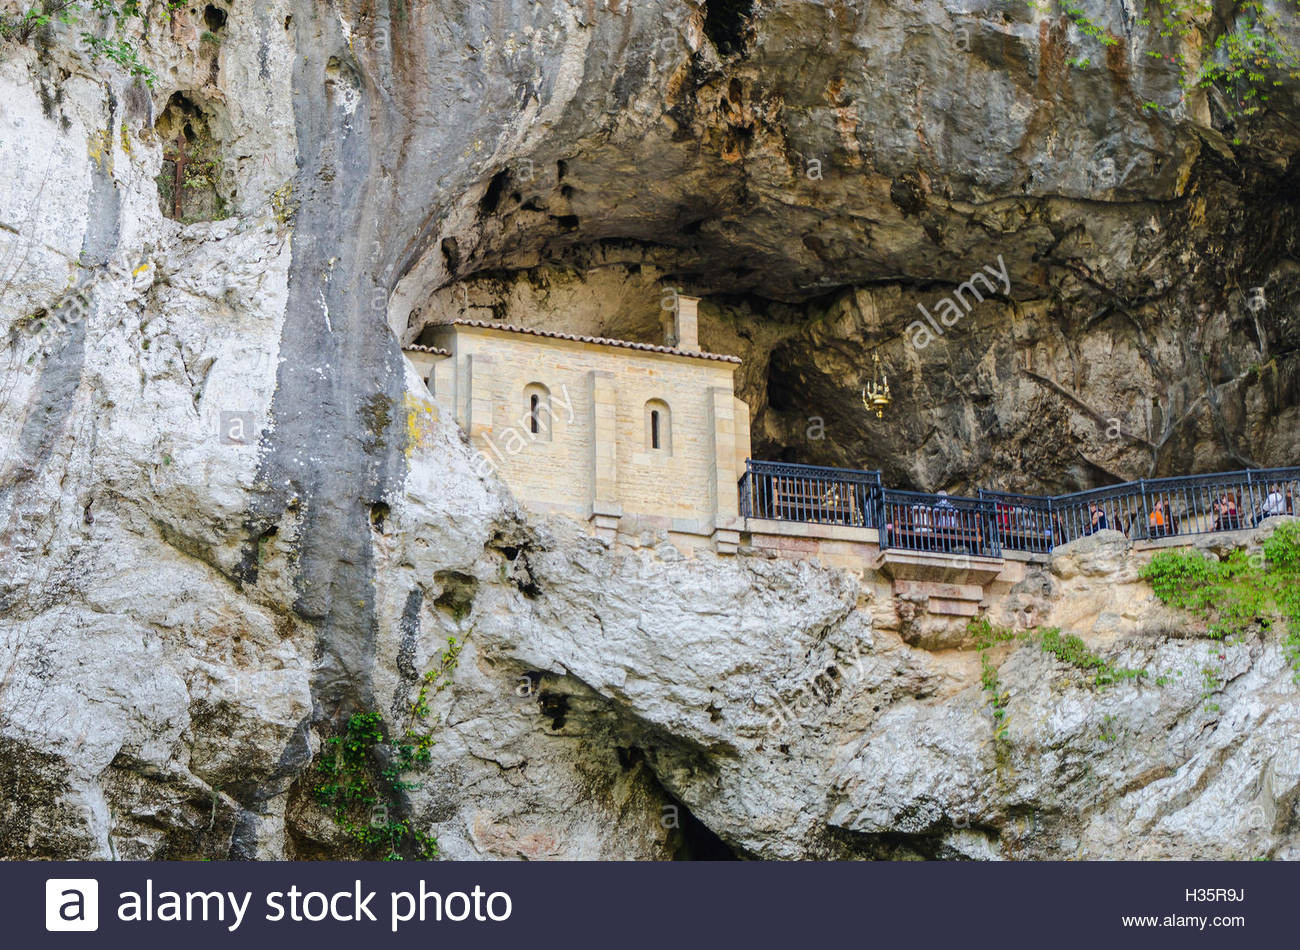 Our Lady Of Covadonga Stock Photos & Our Lady Of Covadonga Stock Images ...